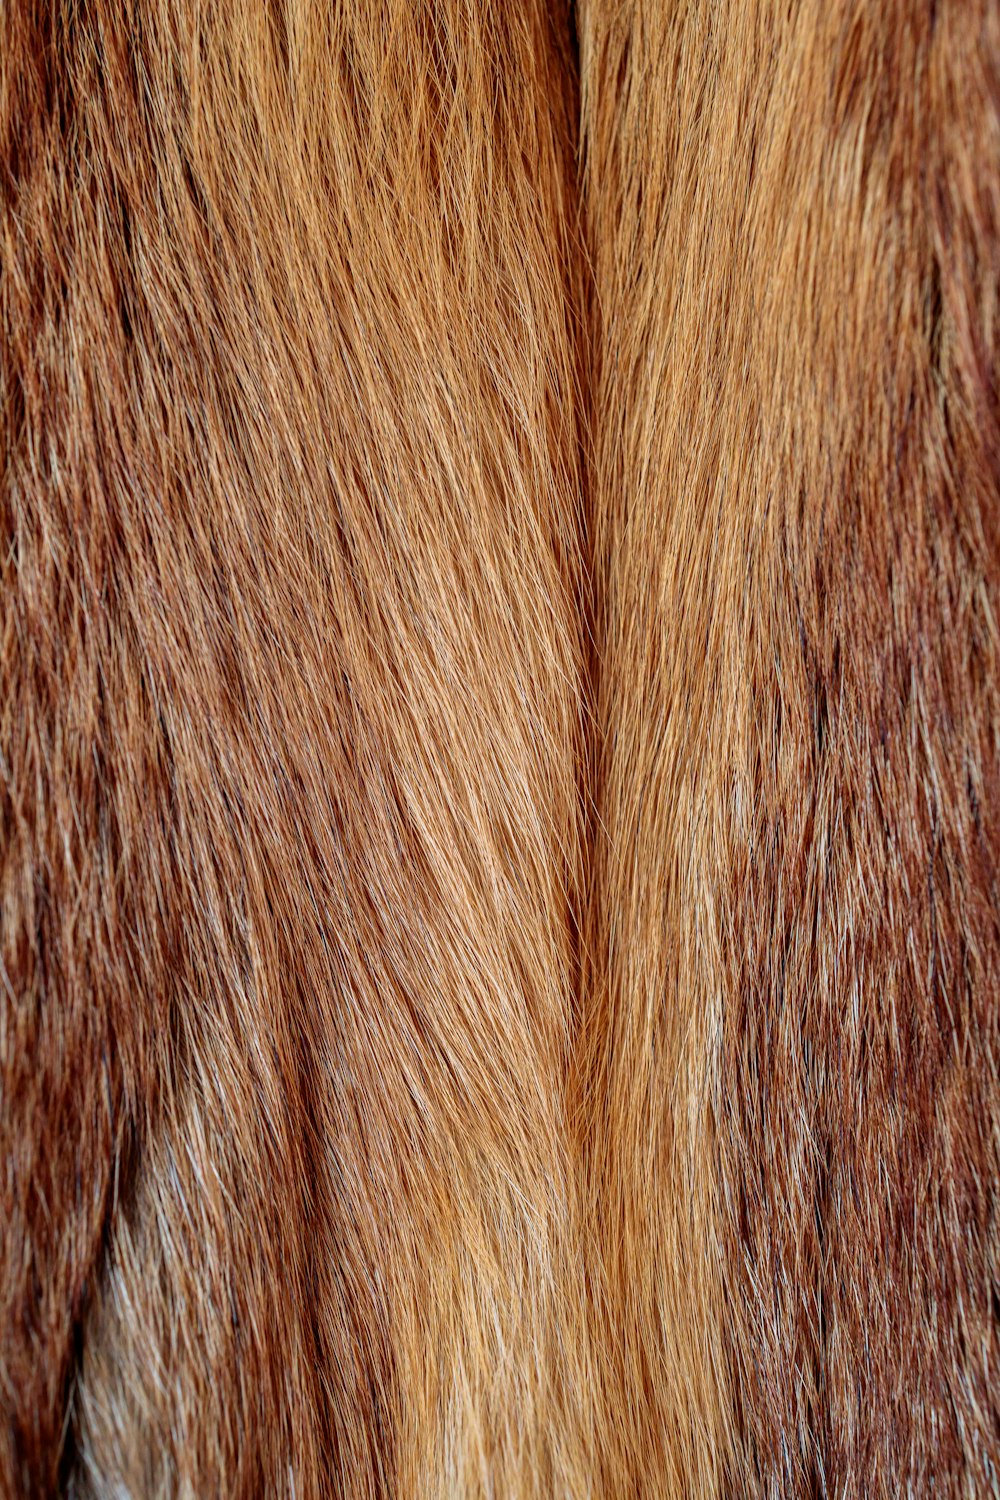 a close up of the fur of a horse